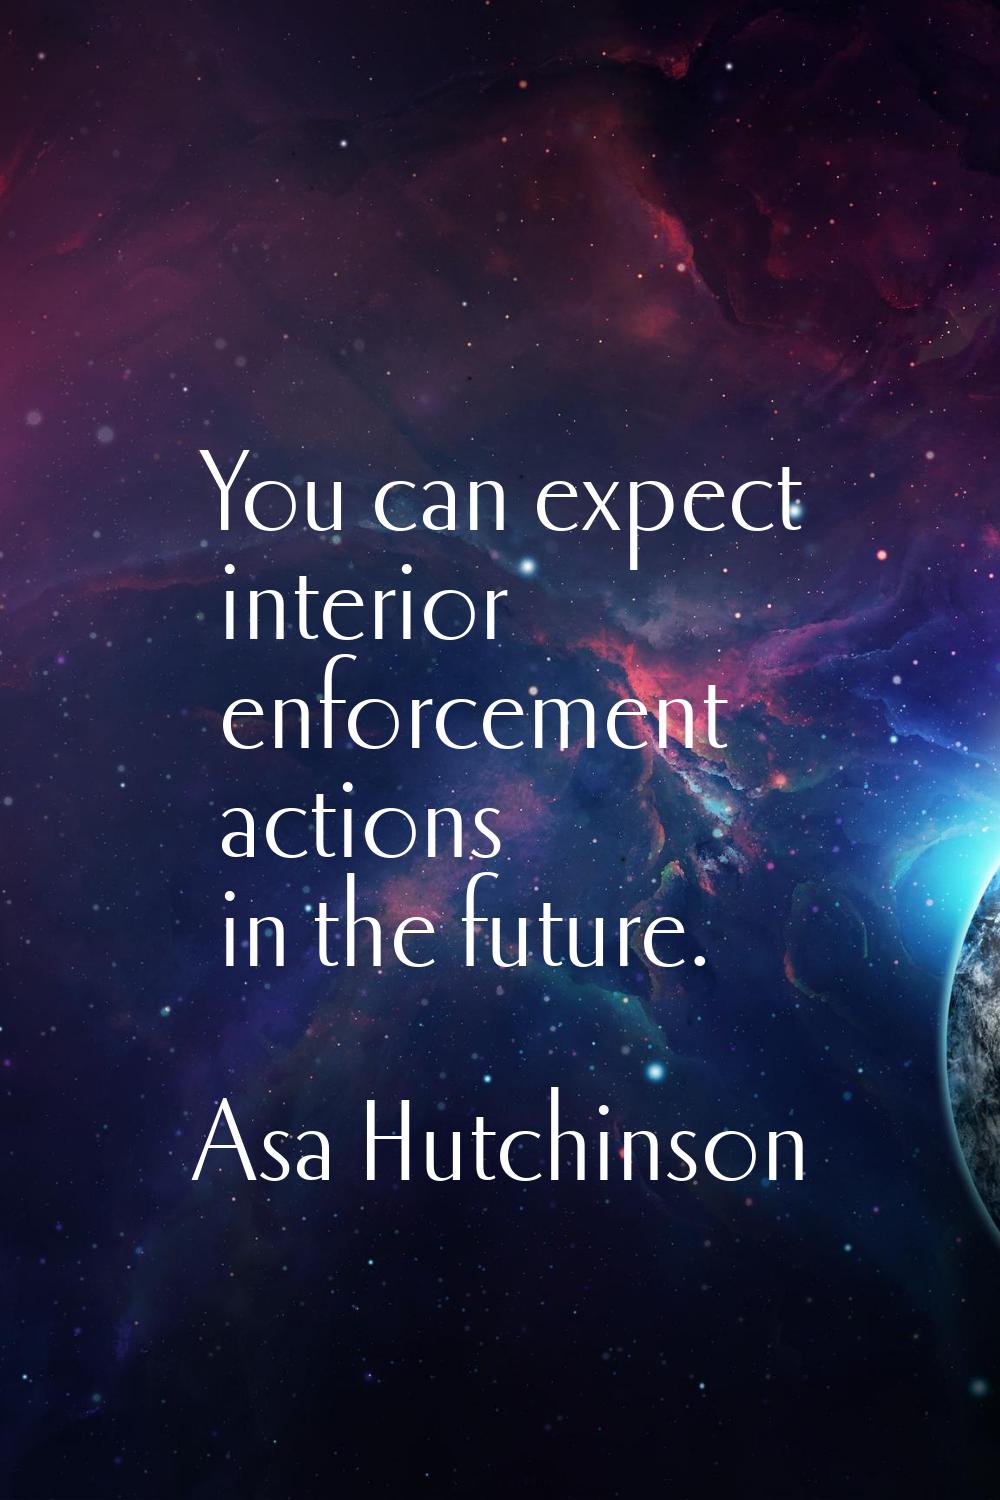 You can expect interior enforcement actions in the future.